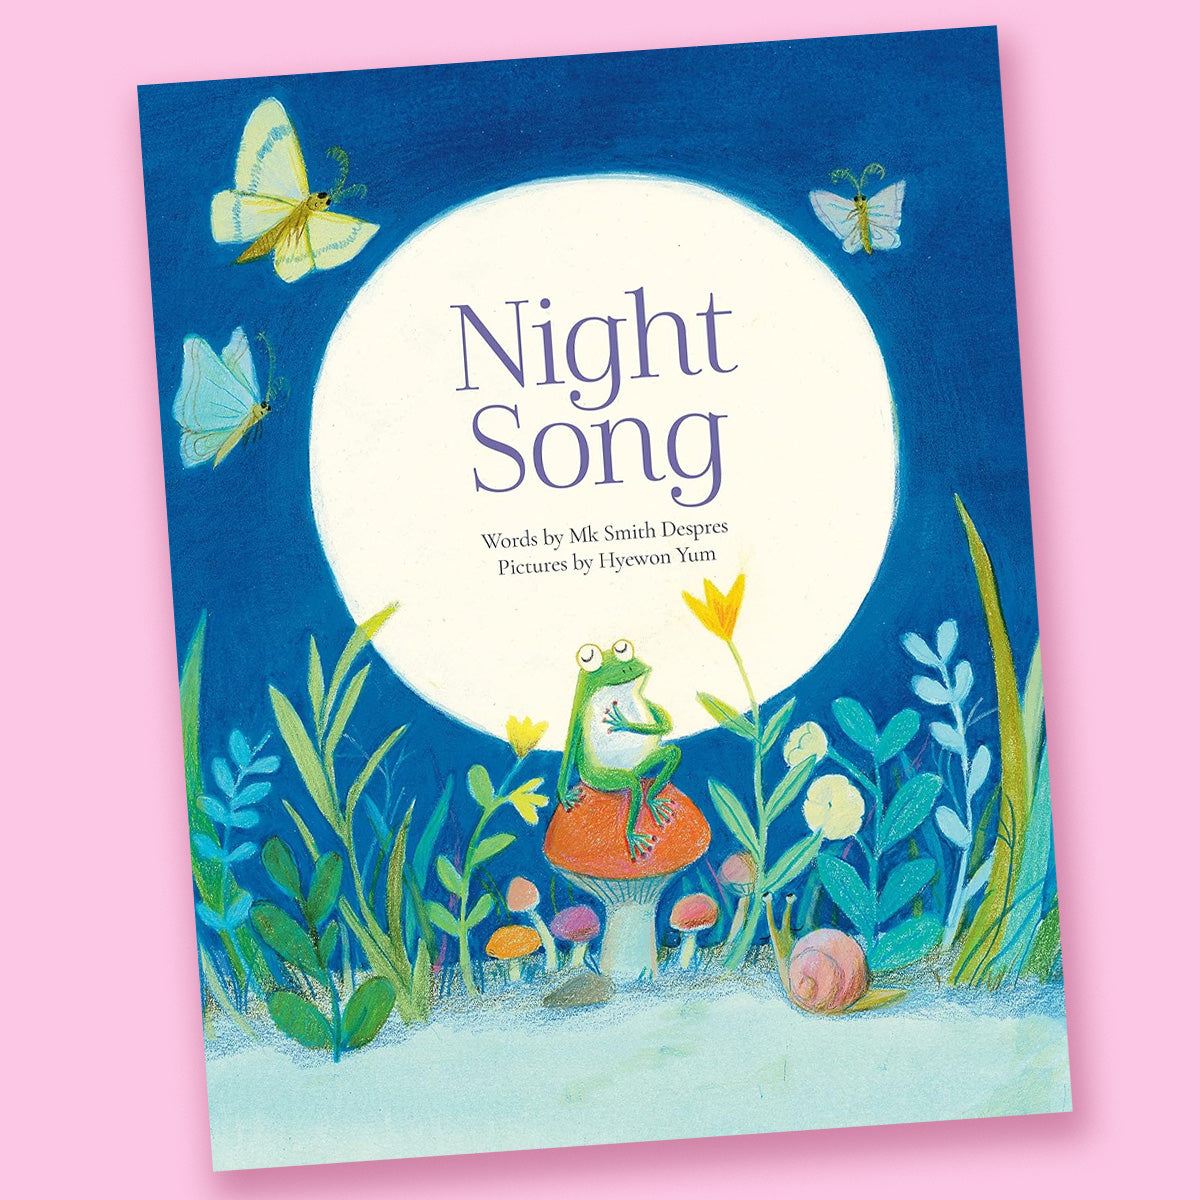 Night Song by Mk Smith Despres and Hyewon Yum